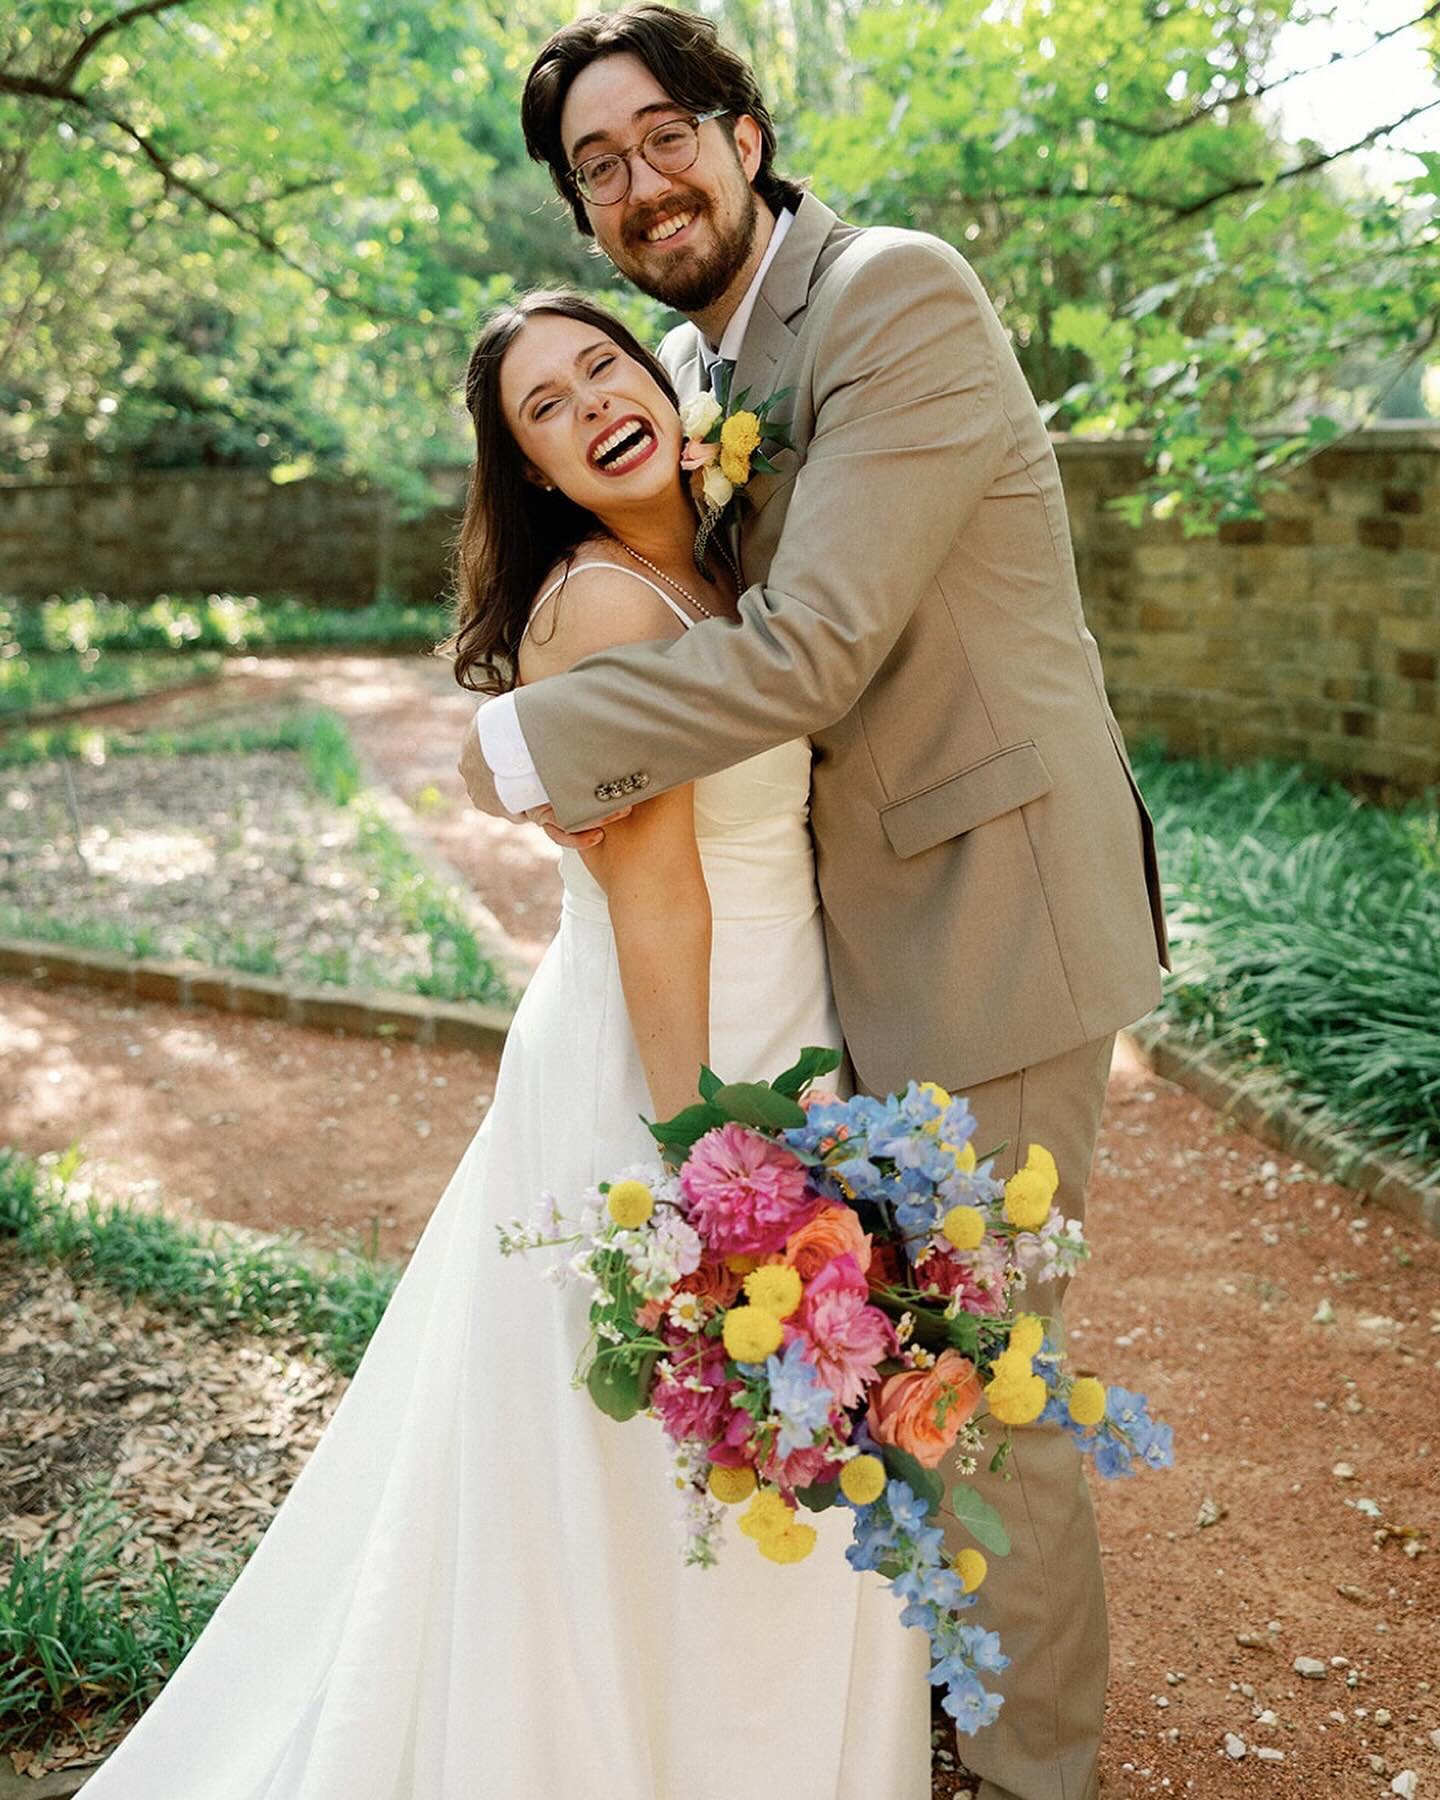 Snippets of joy from Jayce + Karleigh&rsquo;s wedding day